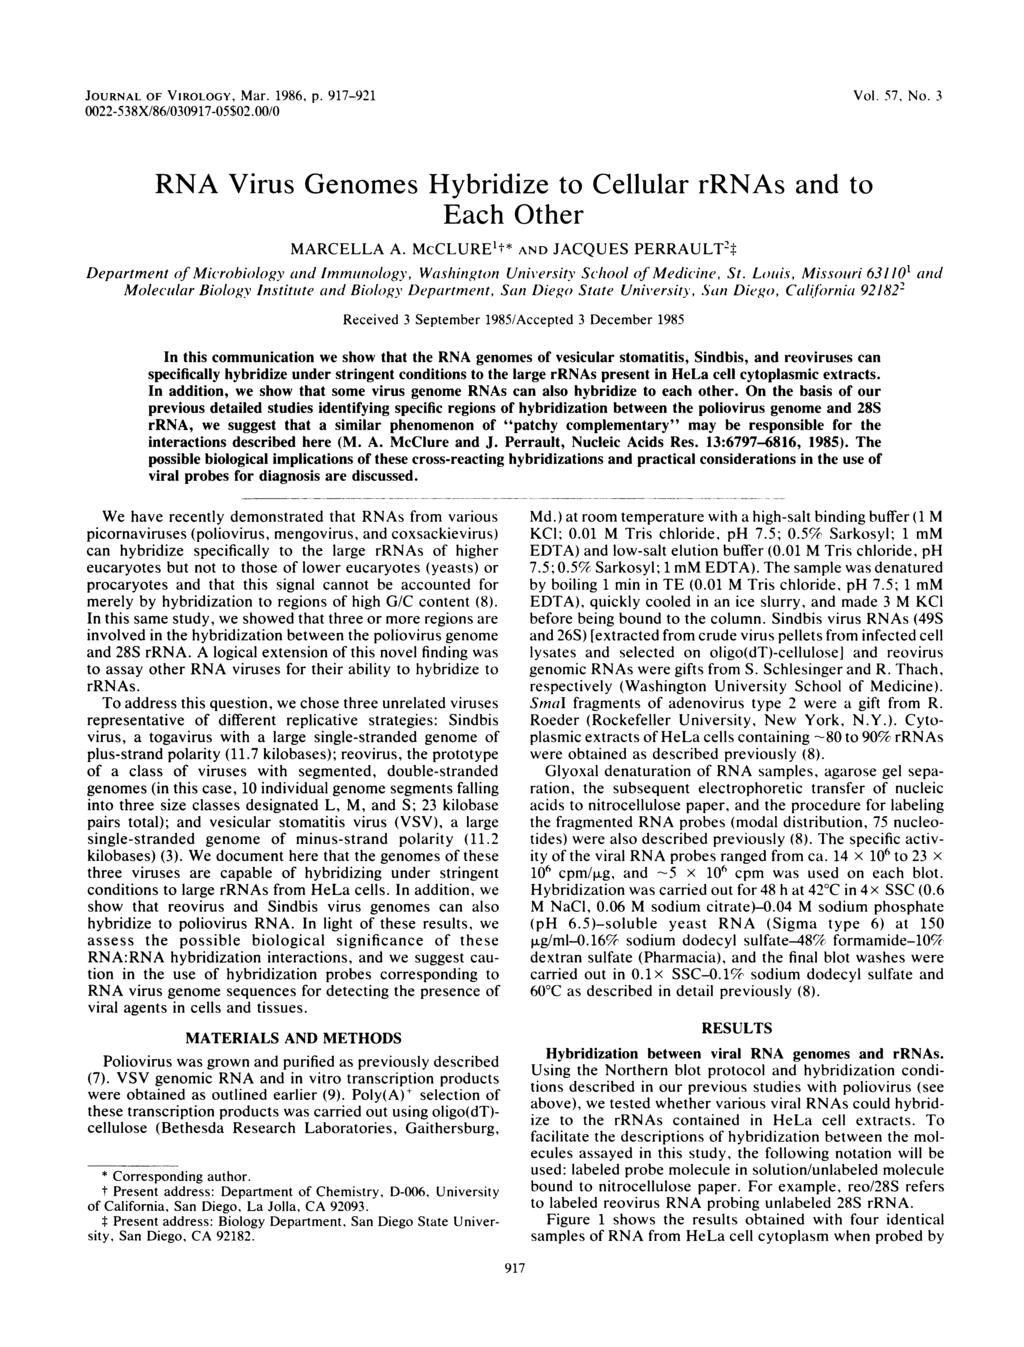 JOURNAL OF VIROLOGY, Mar. 1986, p. 917-921 0022-538X/86/030917-05$02.00/0 Vol. 57, No. 3 RNA Virus Genomes Hybridize to Cellular rrnas and to Each Other MARCELLA A.